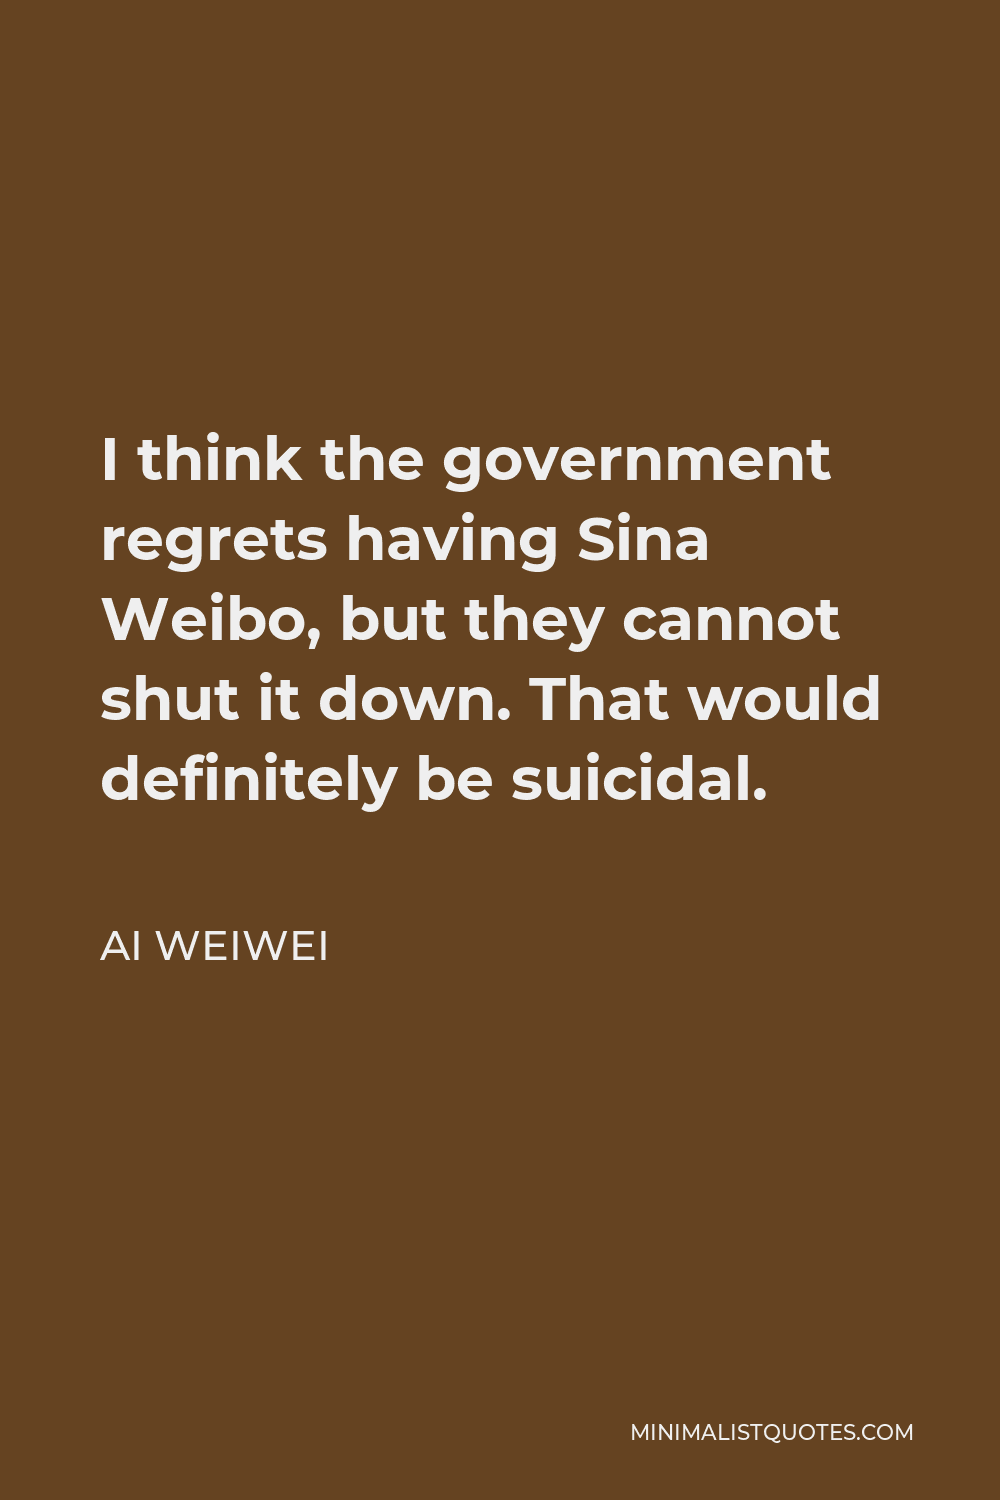 Ai Weiwei Quote - I think the government regrets having Sina Weibo, but they cannot shut it down. That would definitely be suicidal.